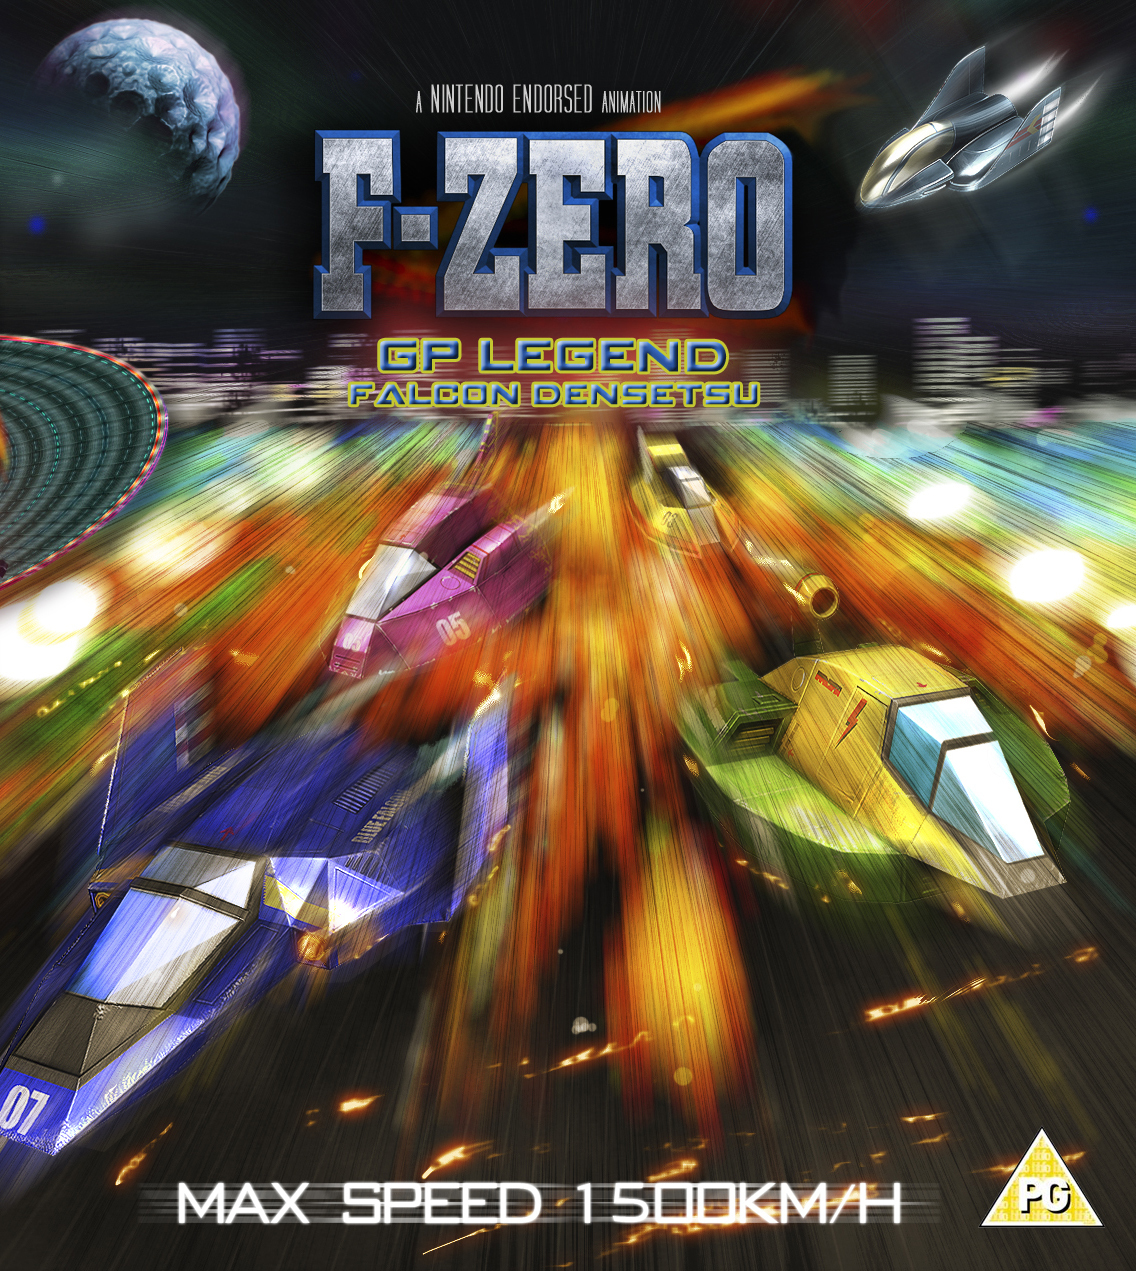 How the FZero Anime Could Inspire a New FZero Game